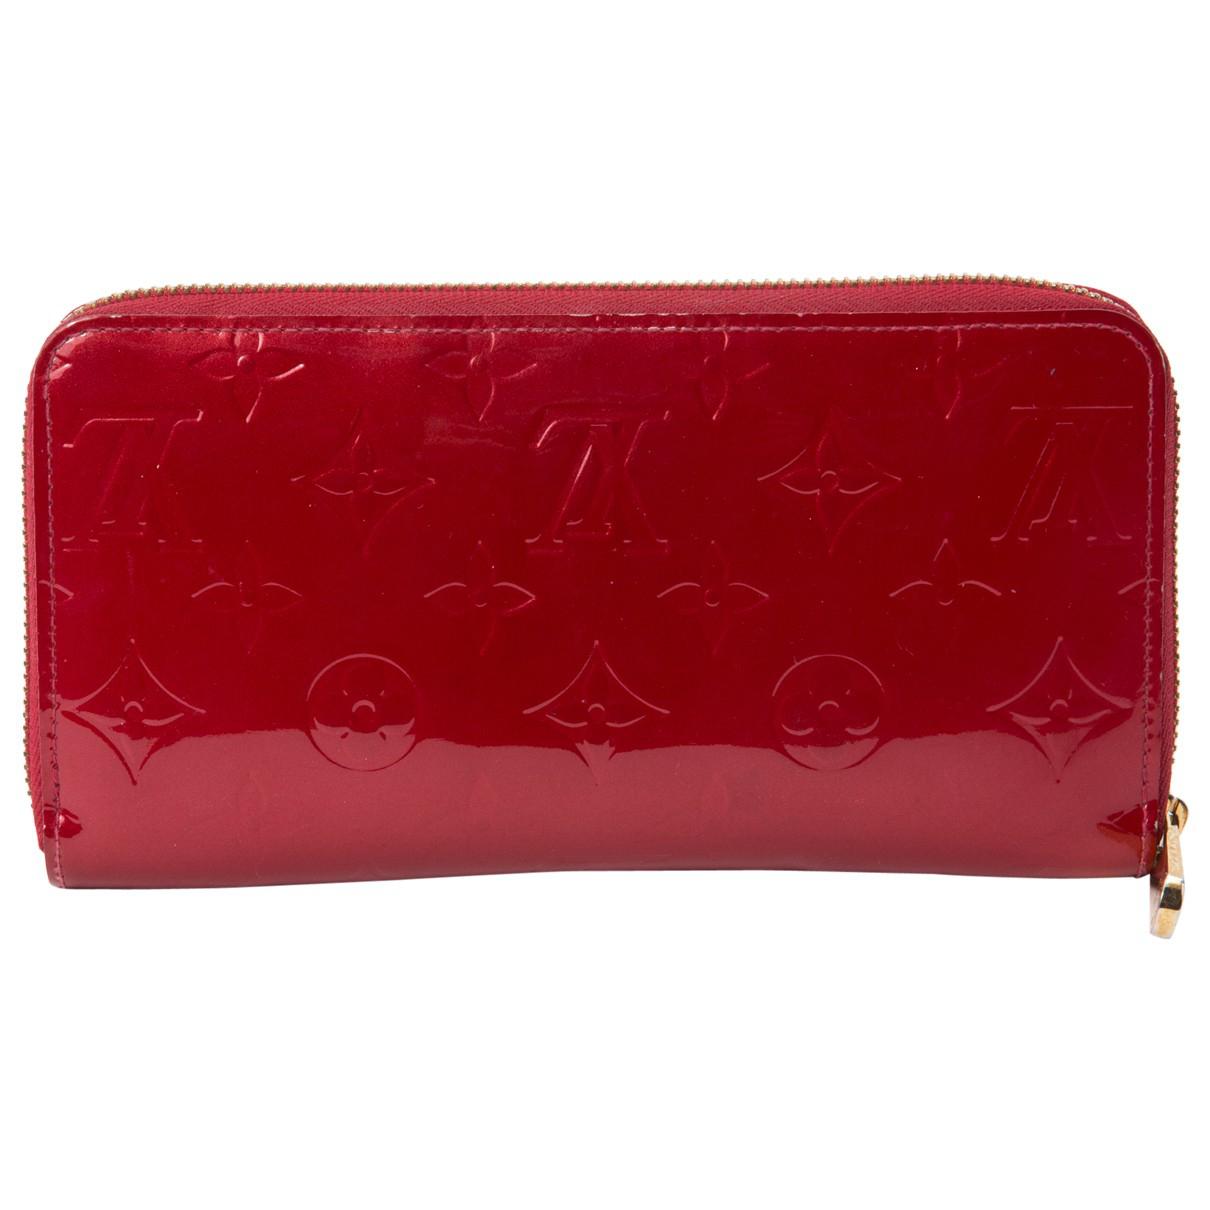 Louis Vuitton Zippy Wallet Red | Confederated Tribes of ...